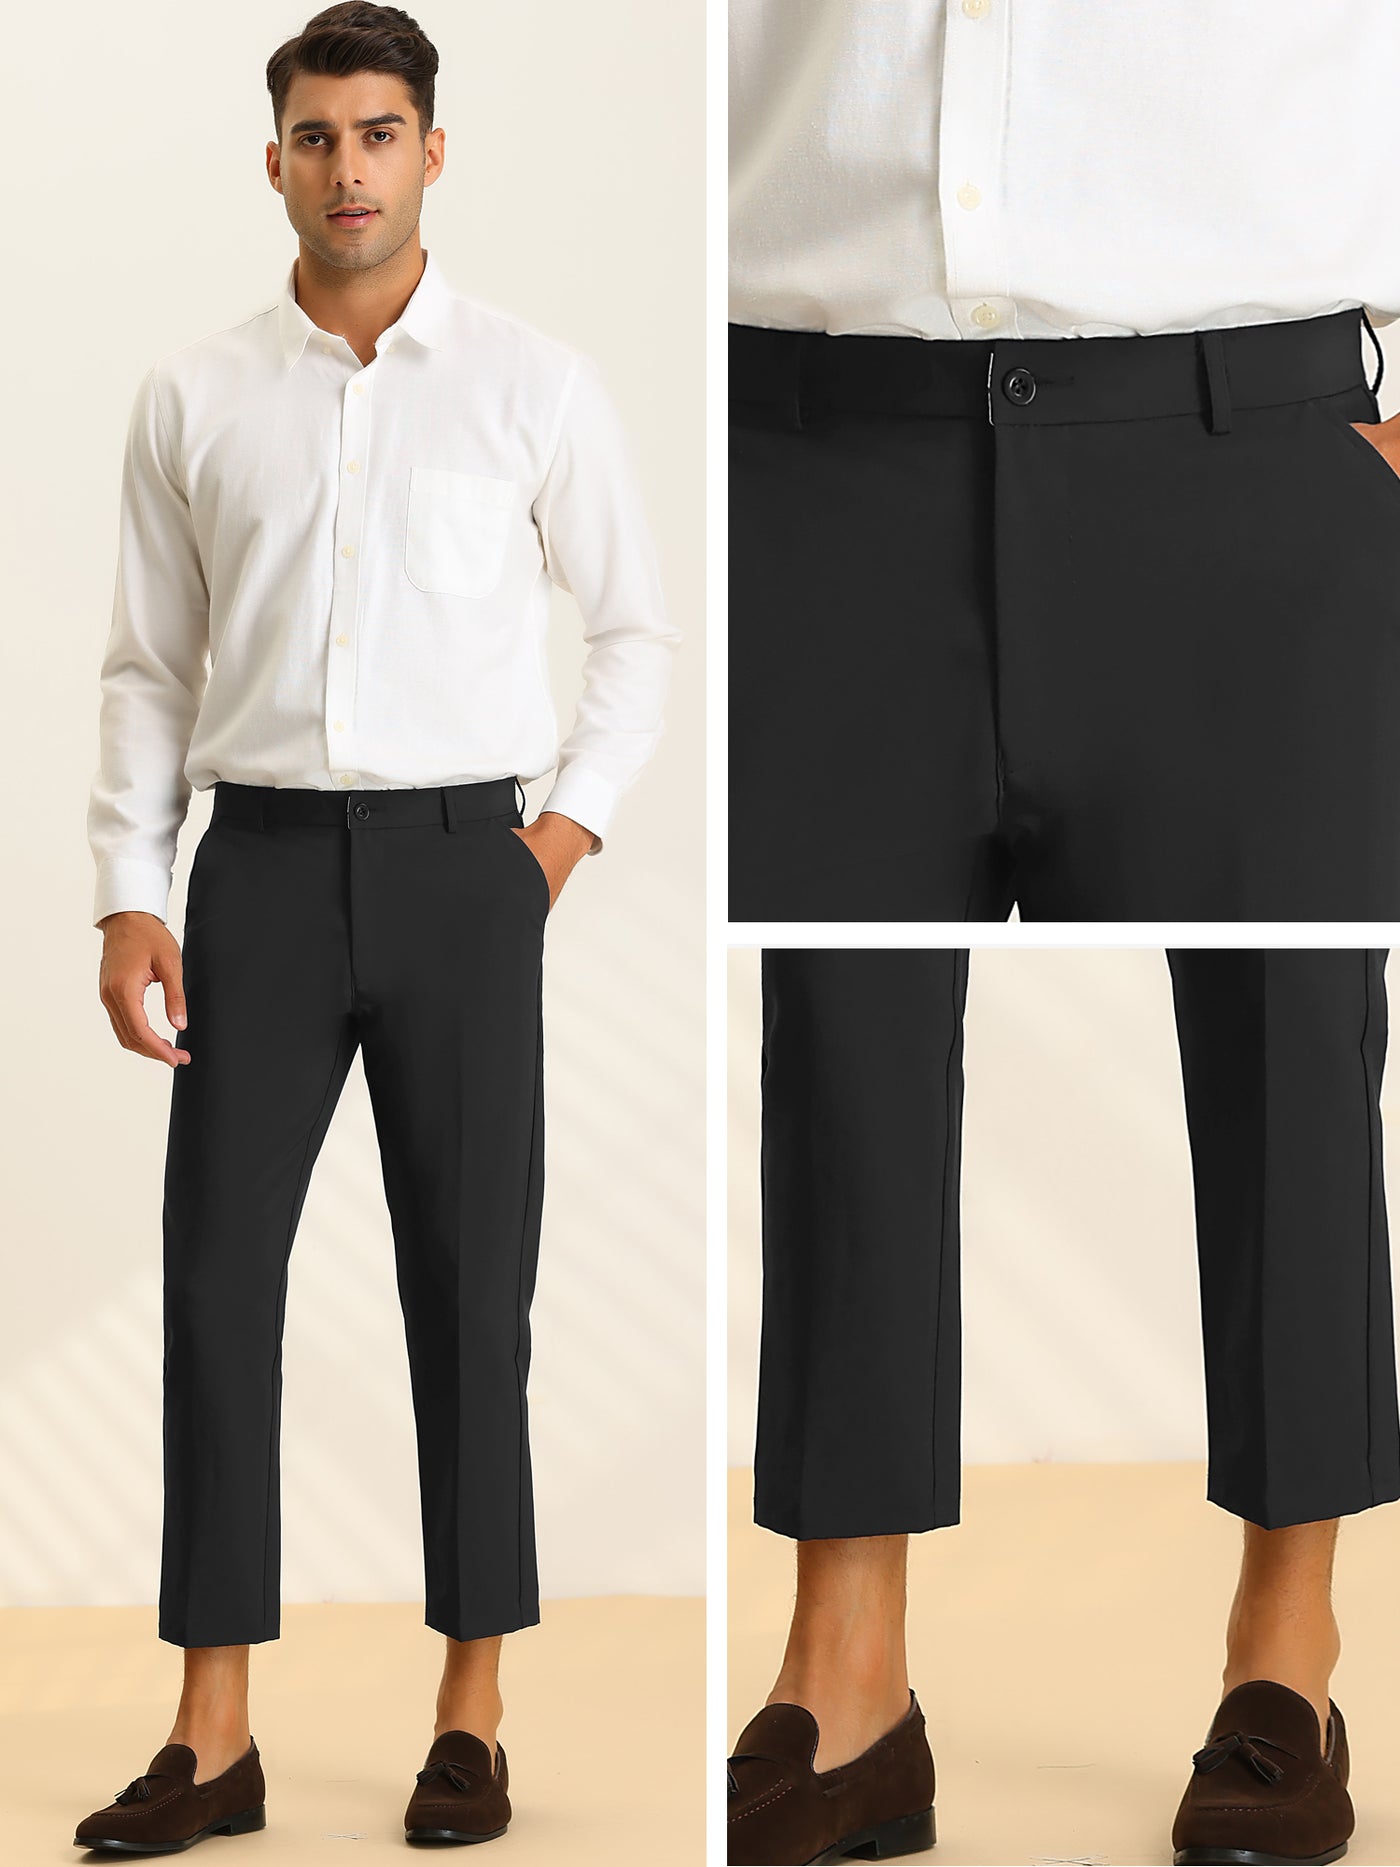 Bublédon Men's Business Cropped Solid Flat Front Chino Tapered Dress Pants